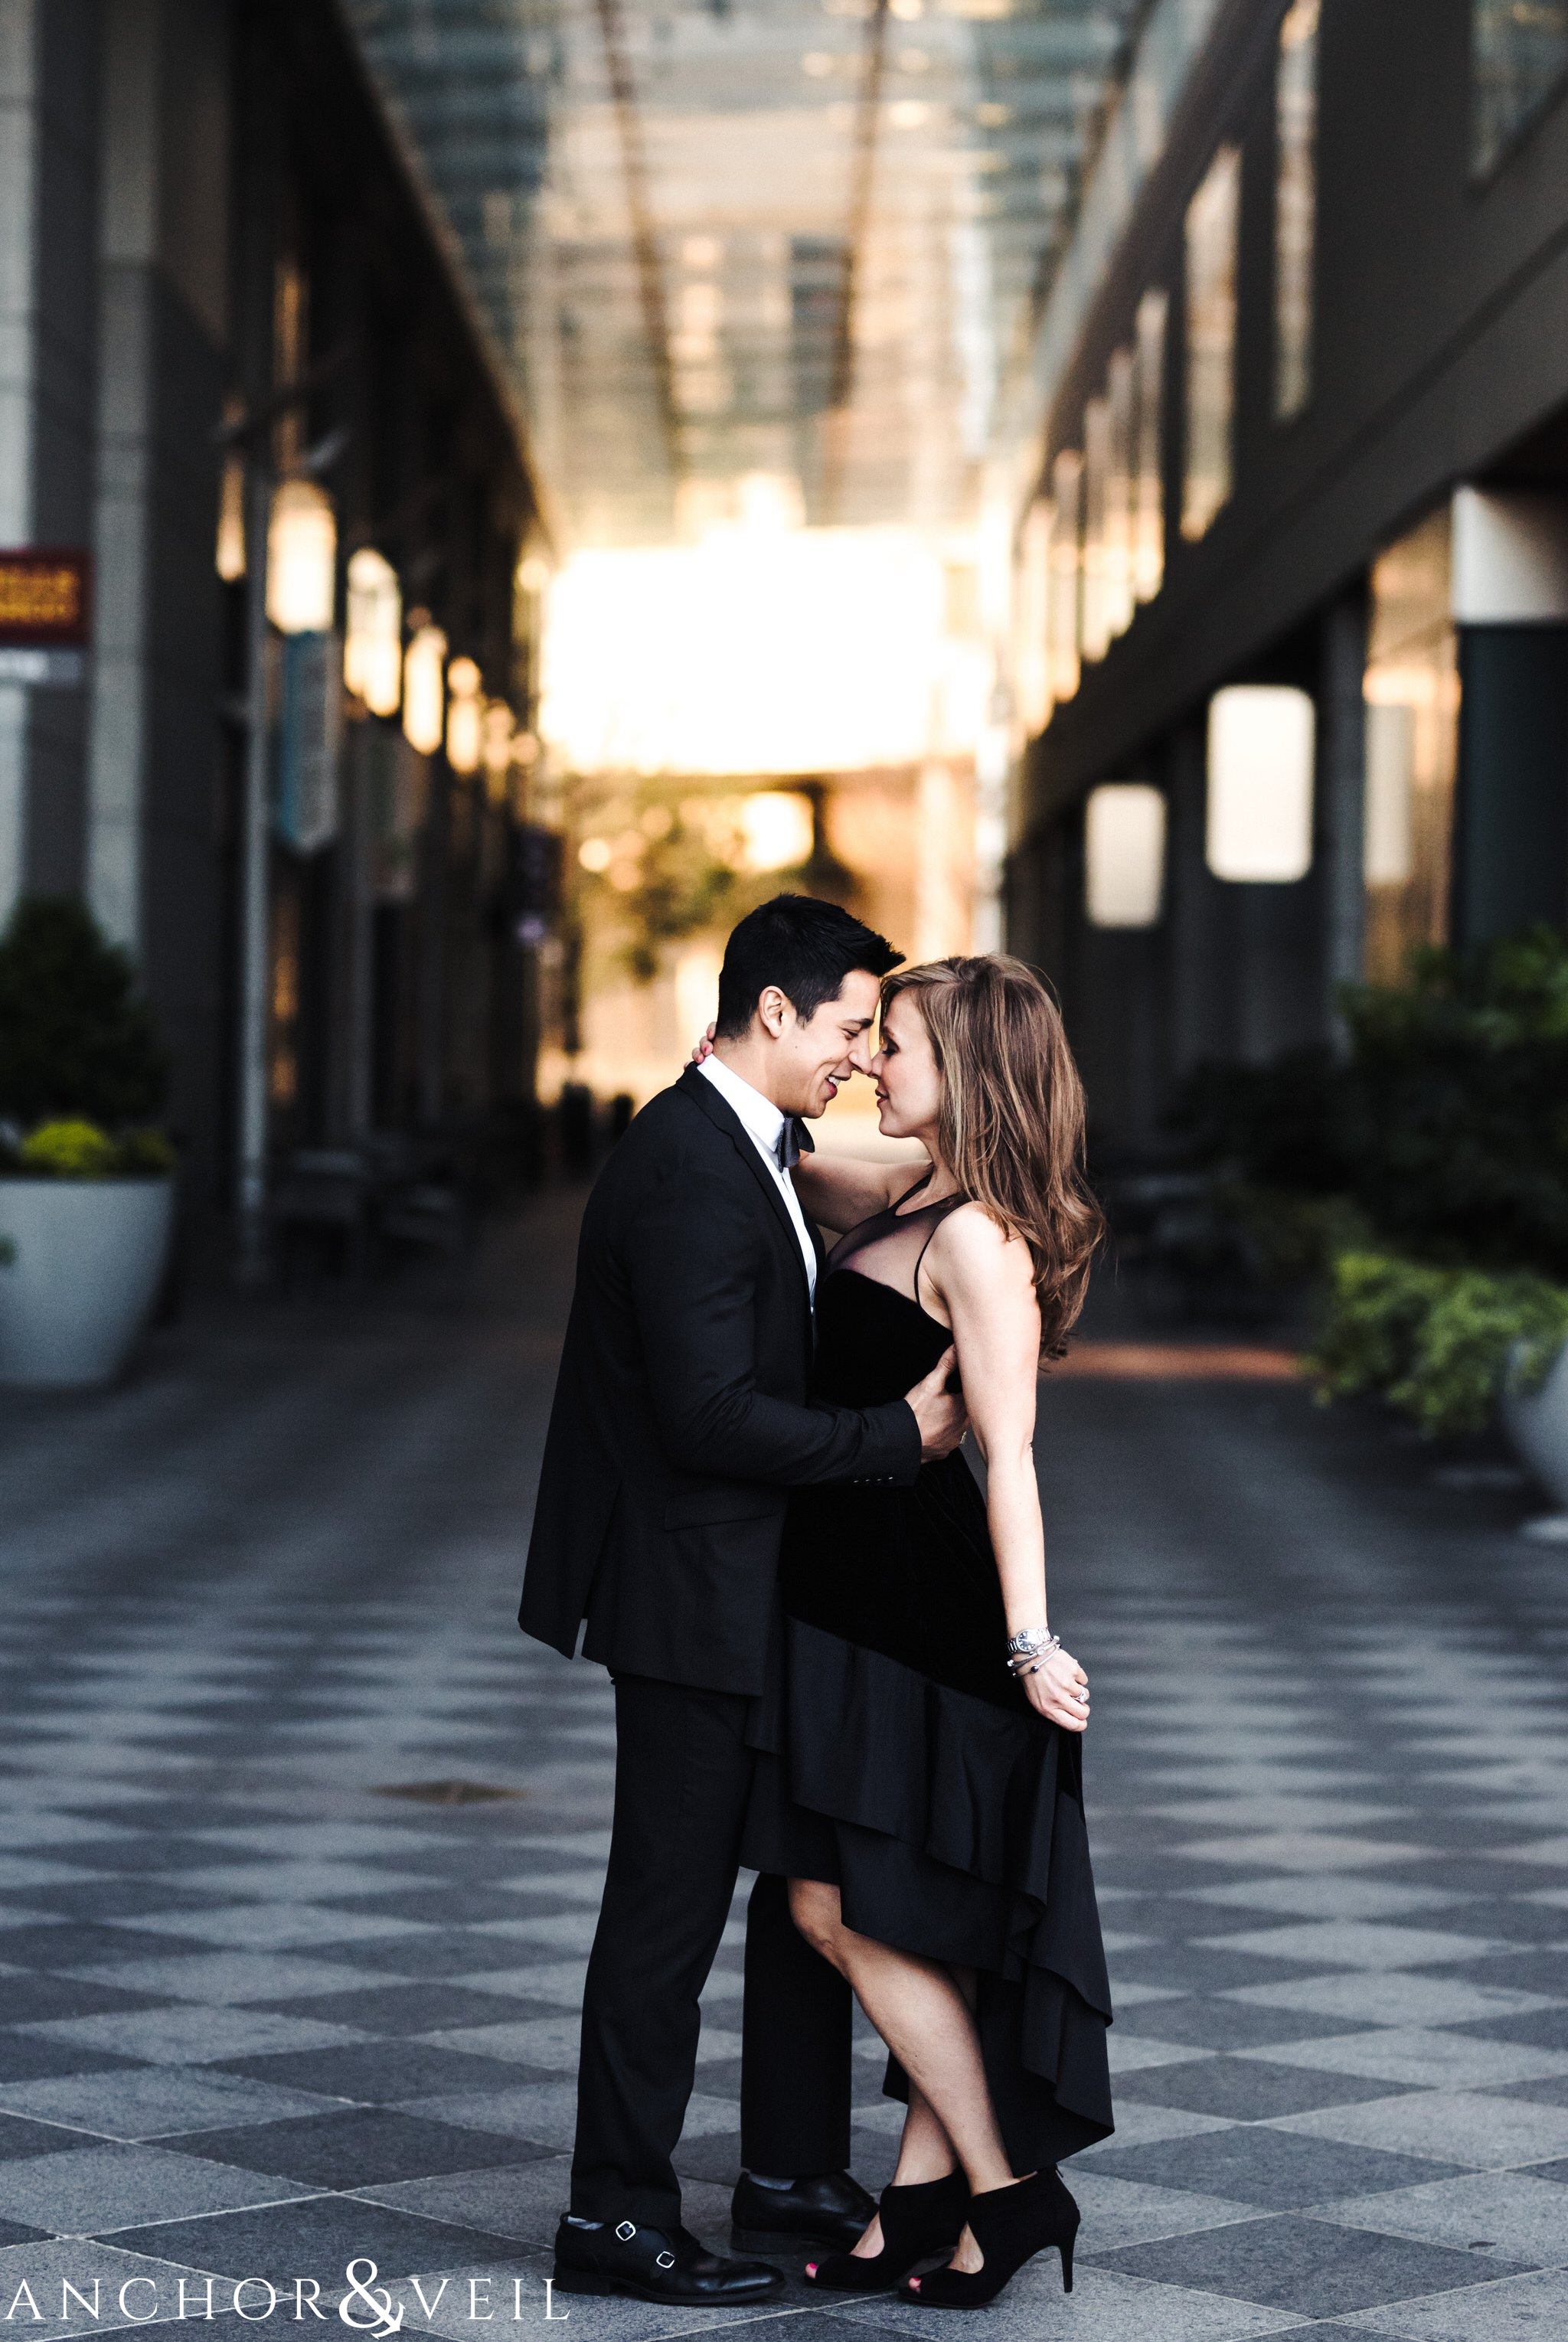 in the walkway During their Uptown Charlotte Engagement Session